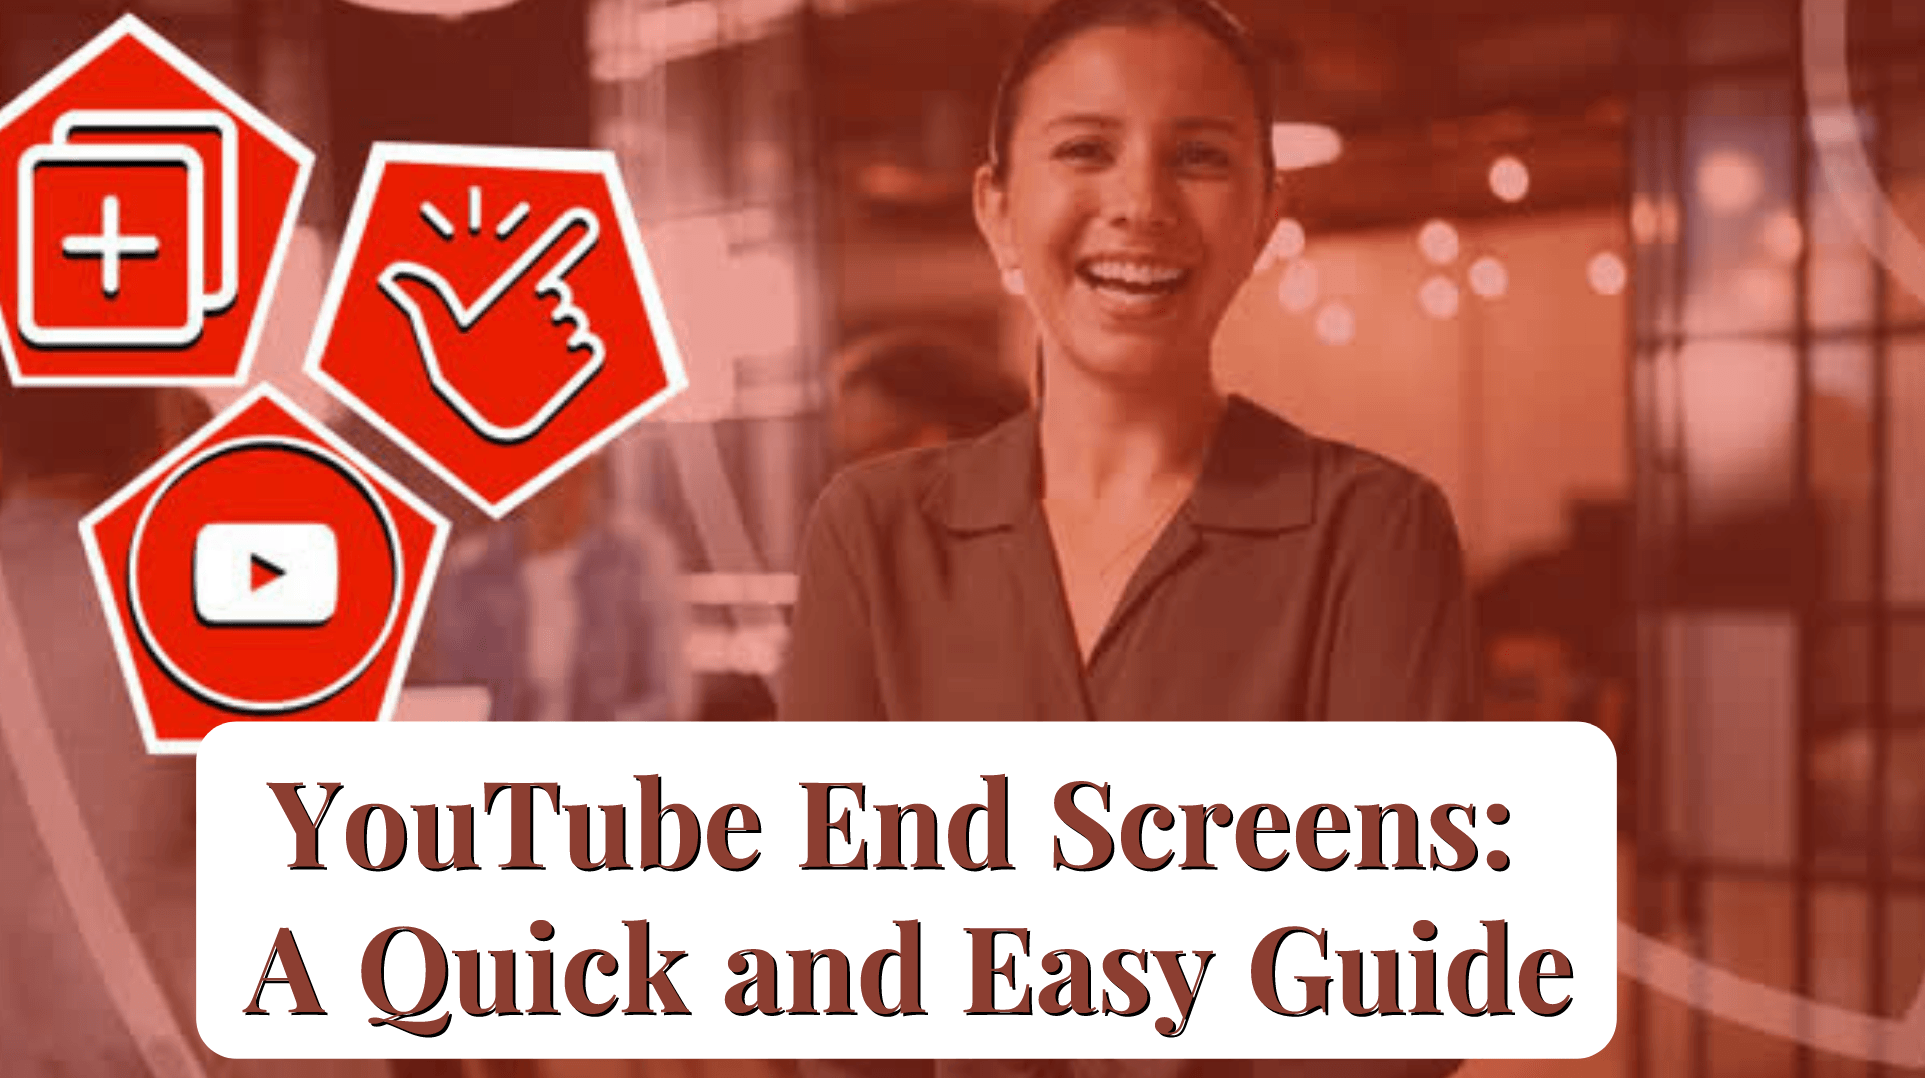 YouTube End Screens: A Quick and Easy Guide